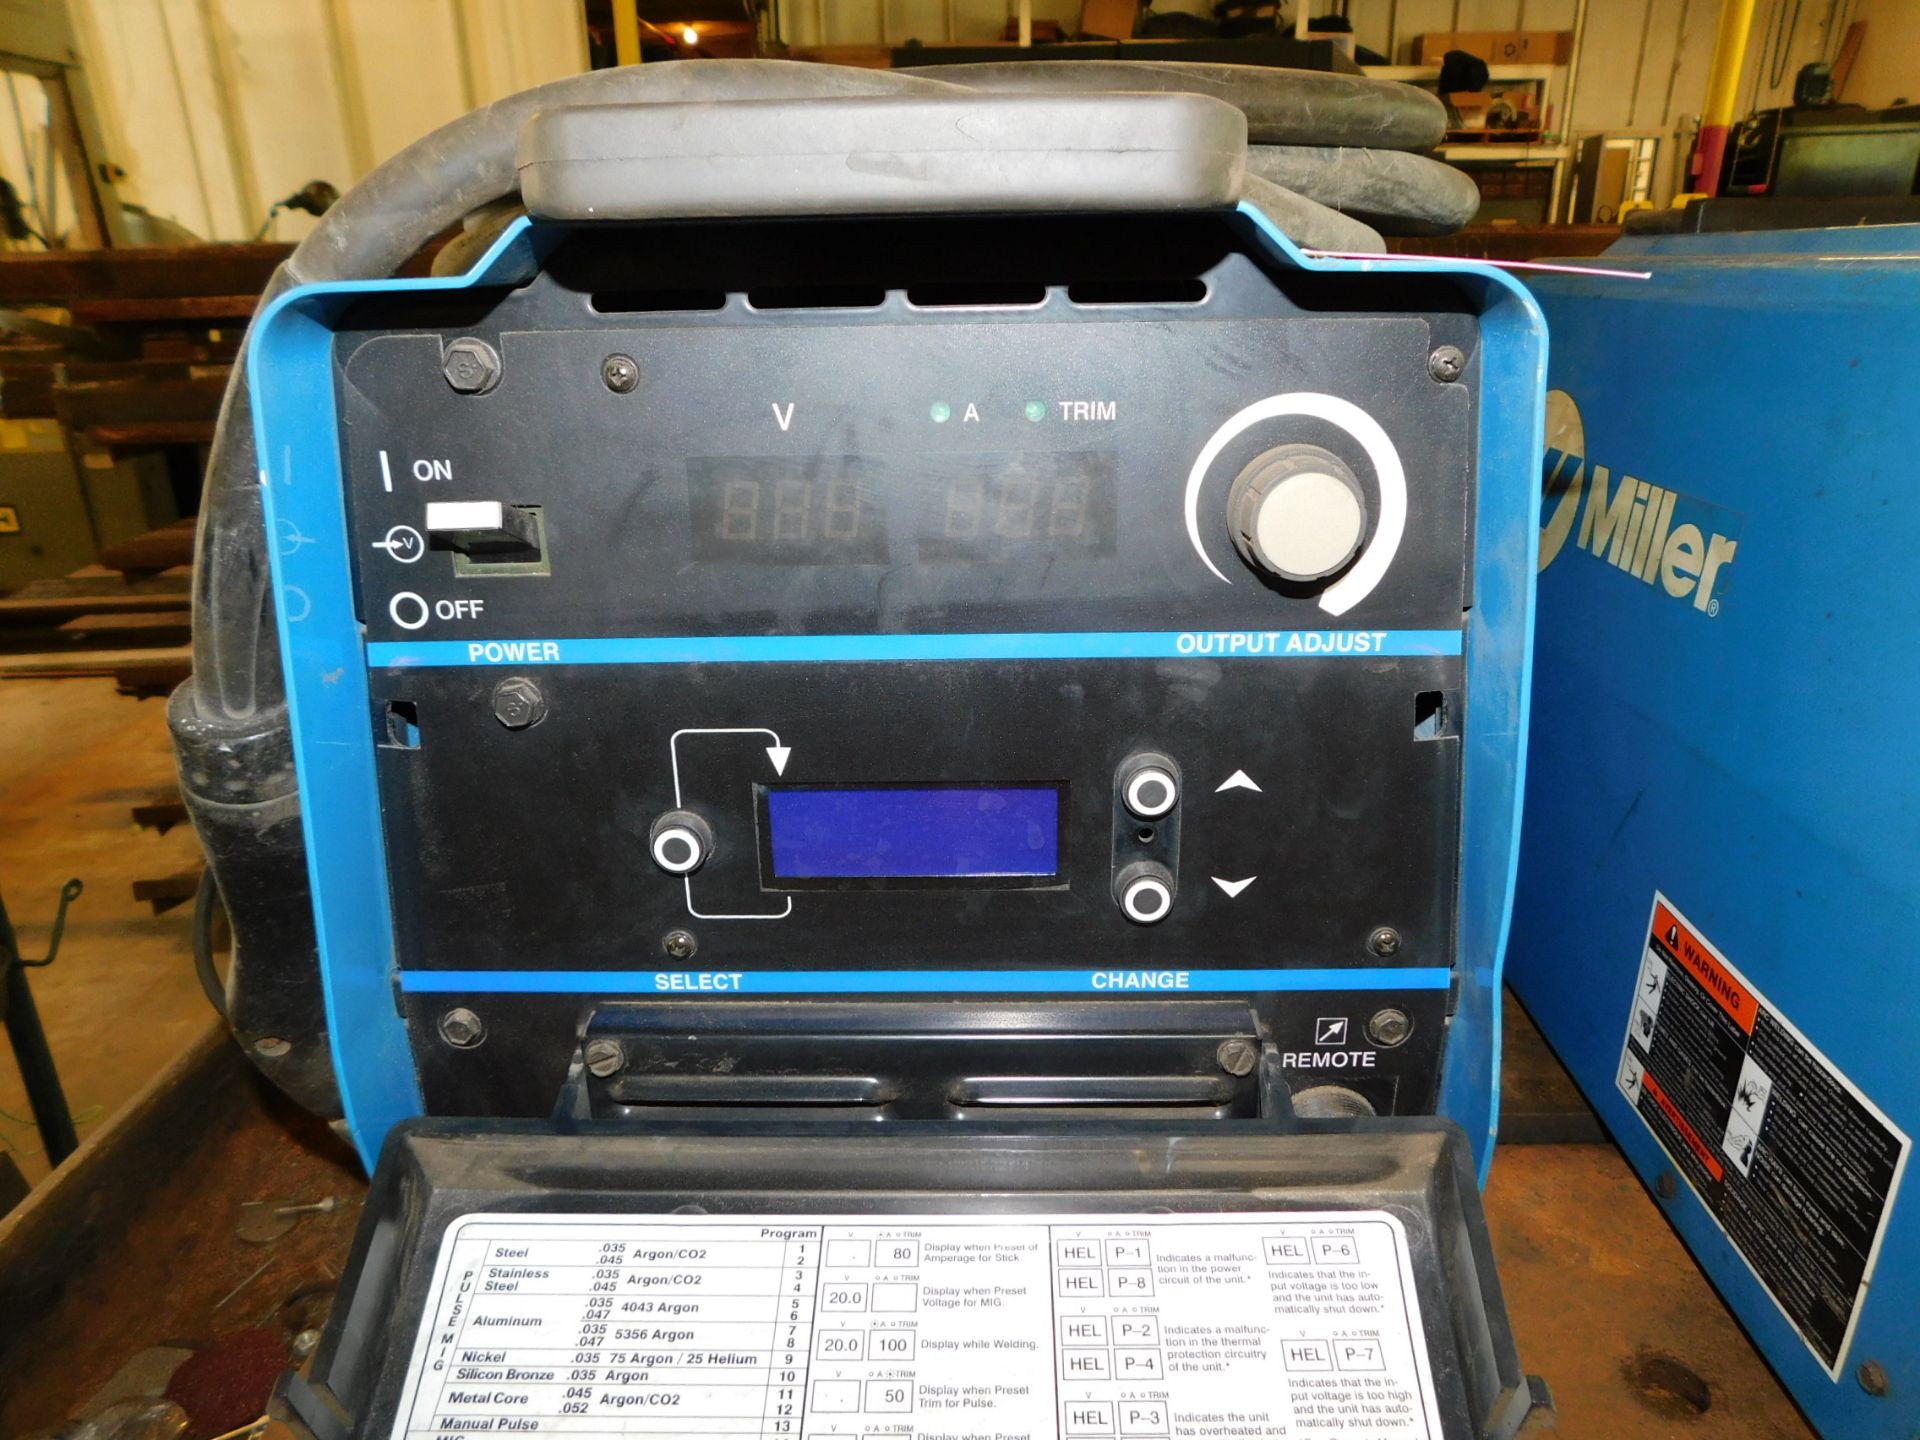 Miller Invision 354MP DC Inverter Arc Welder, s/n LG160263A, 1 or 3 Phase, 230/460 Vo.ts - Image 3 of 7